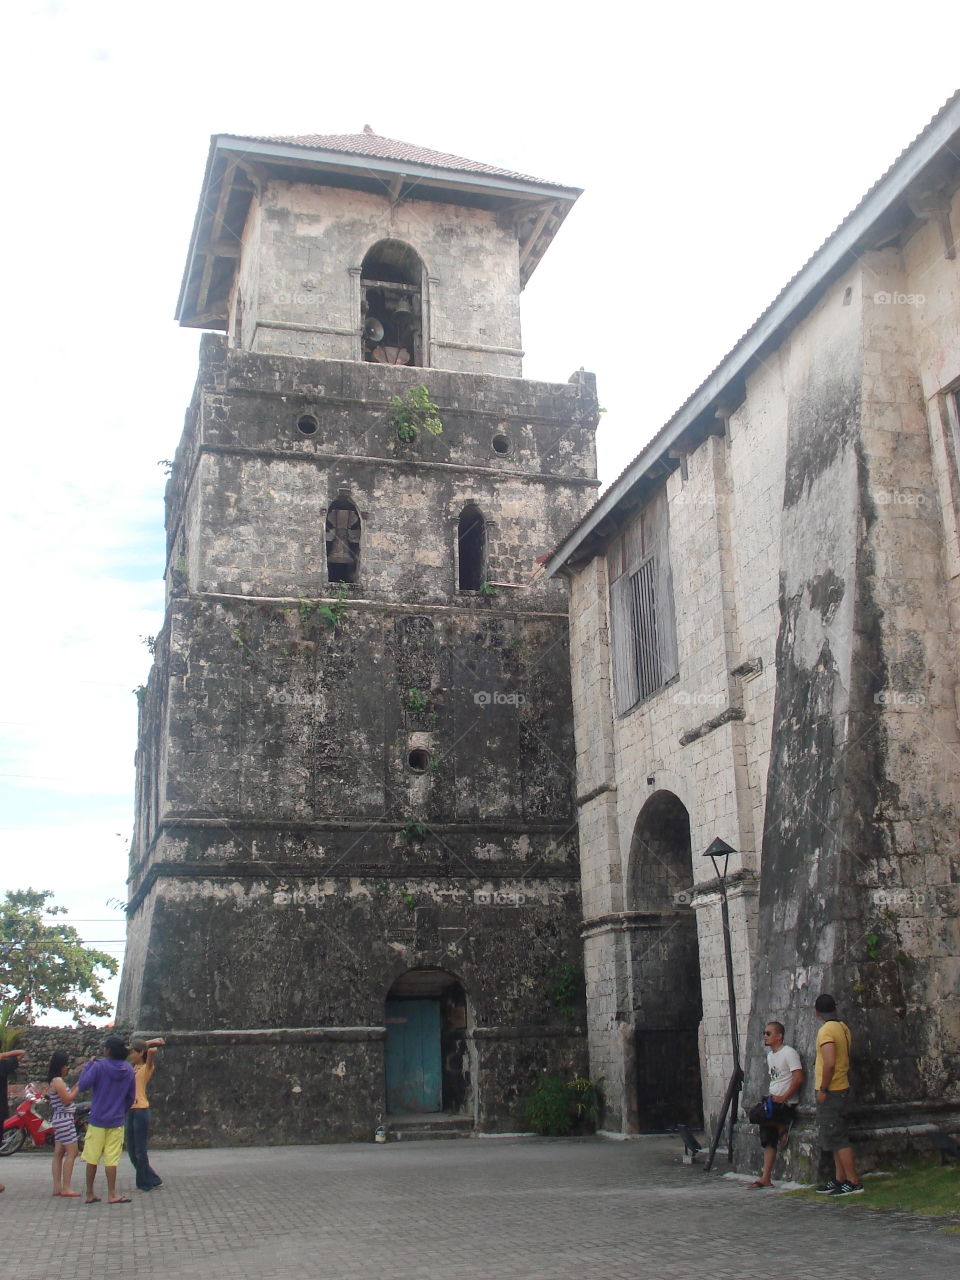 baclayon church bell tower bohol. the bell tower before the bohol earthquake